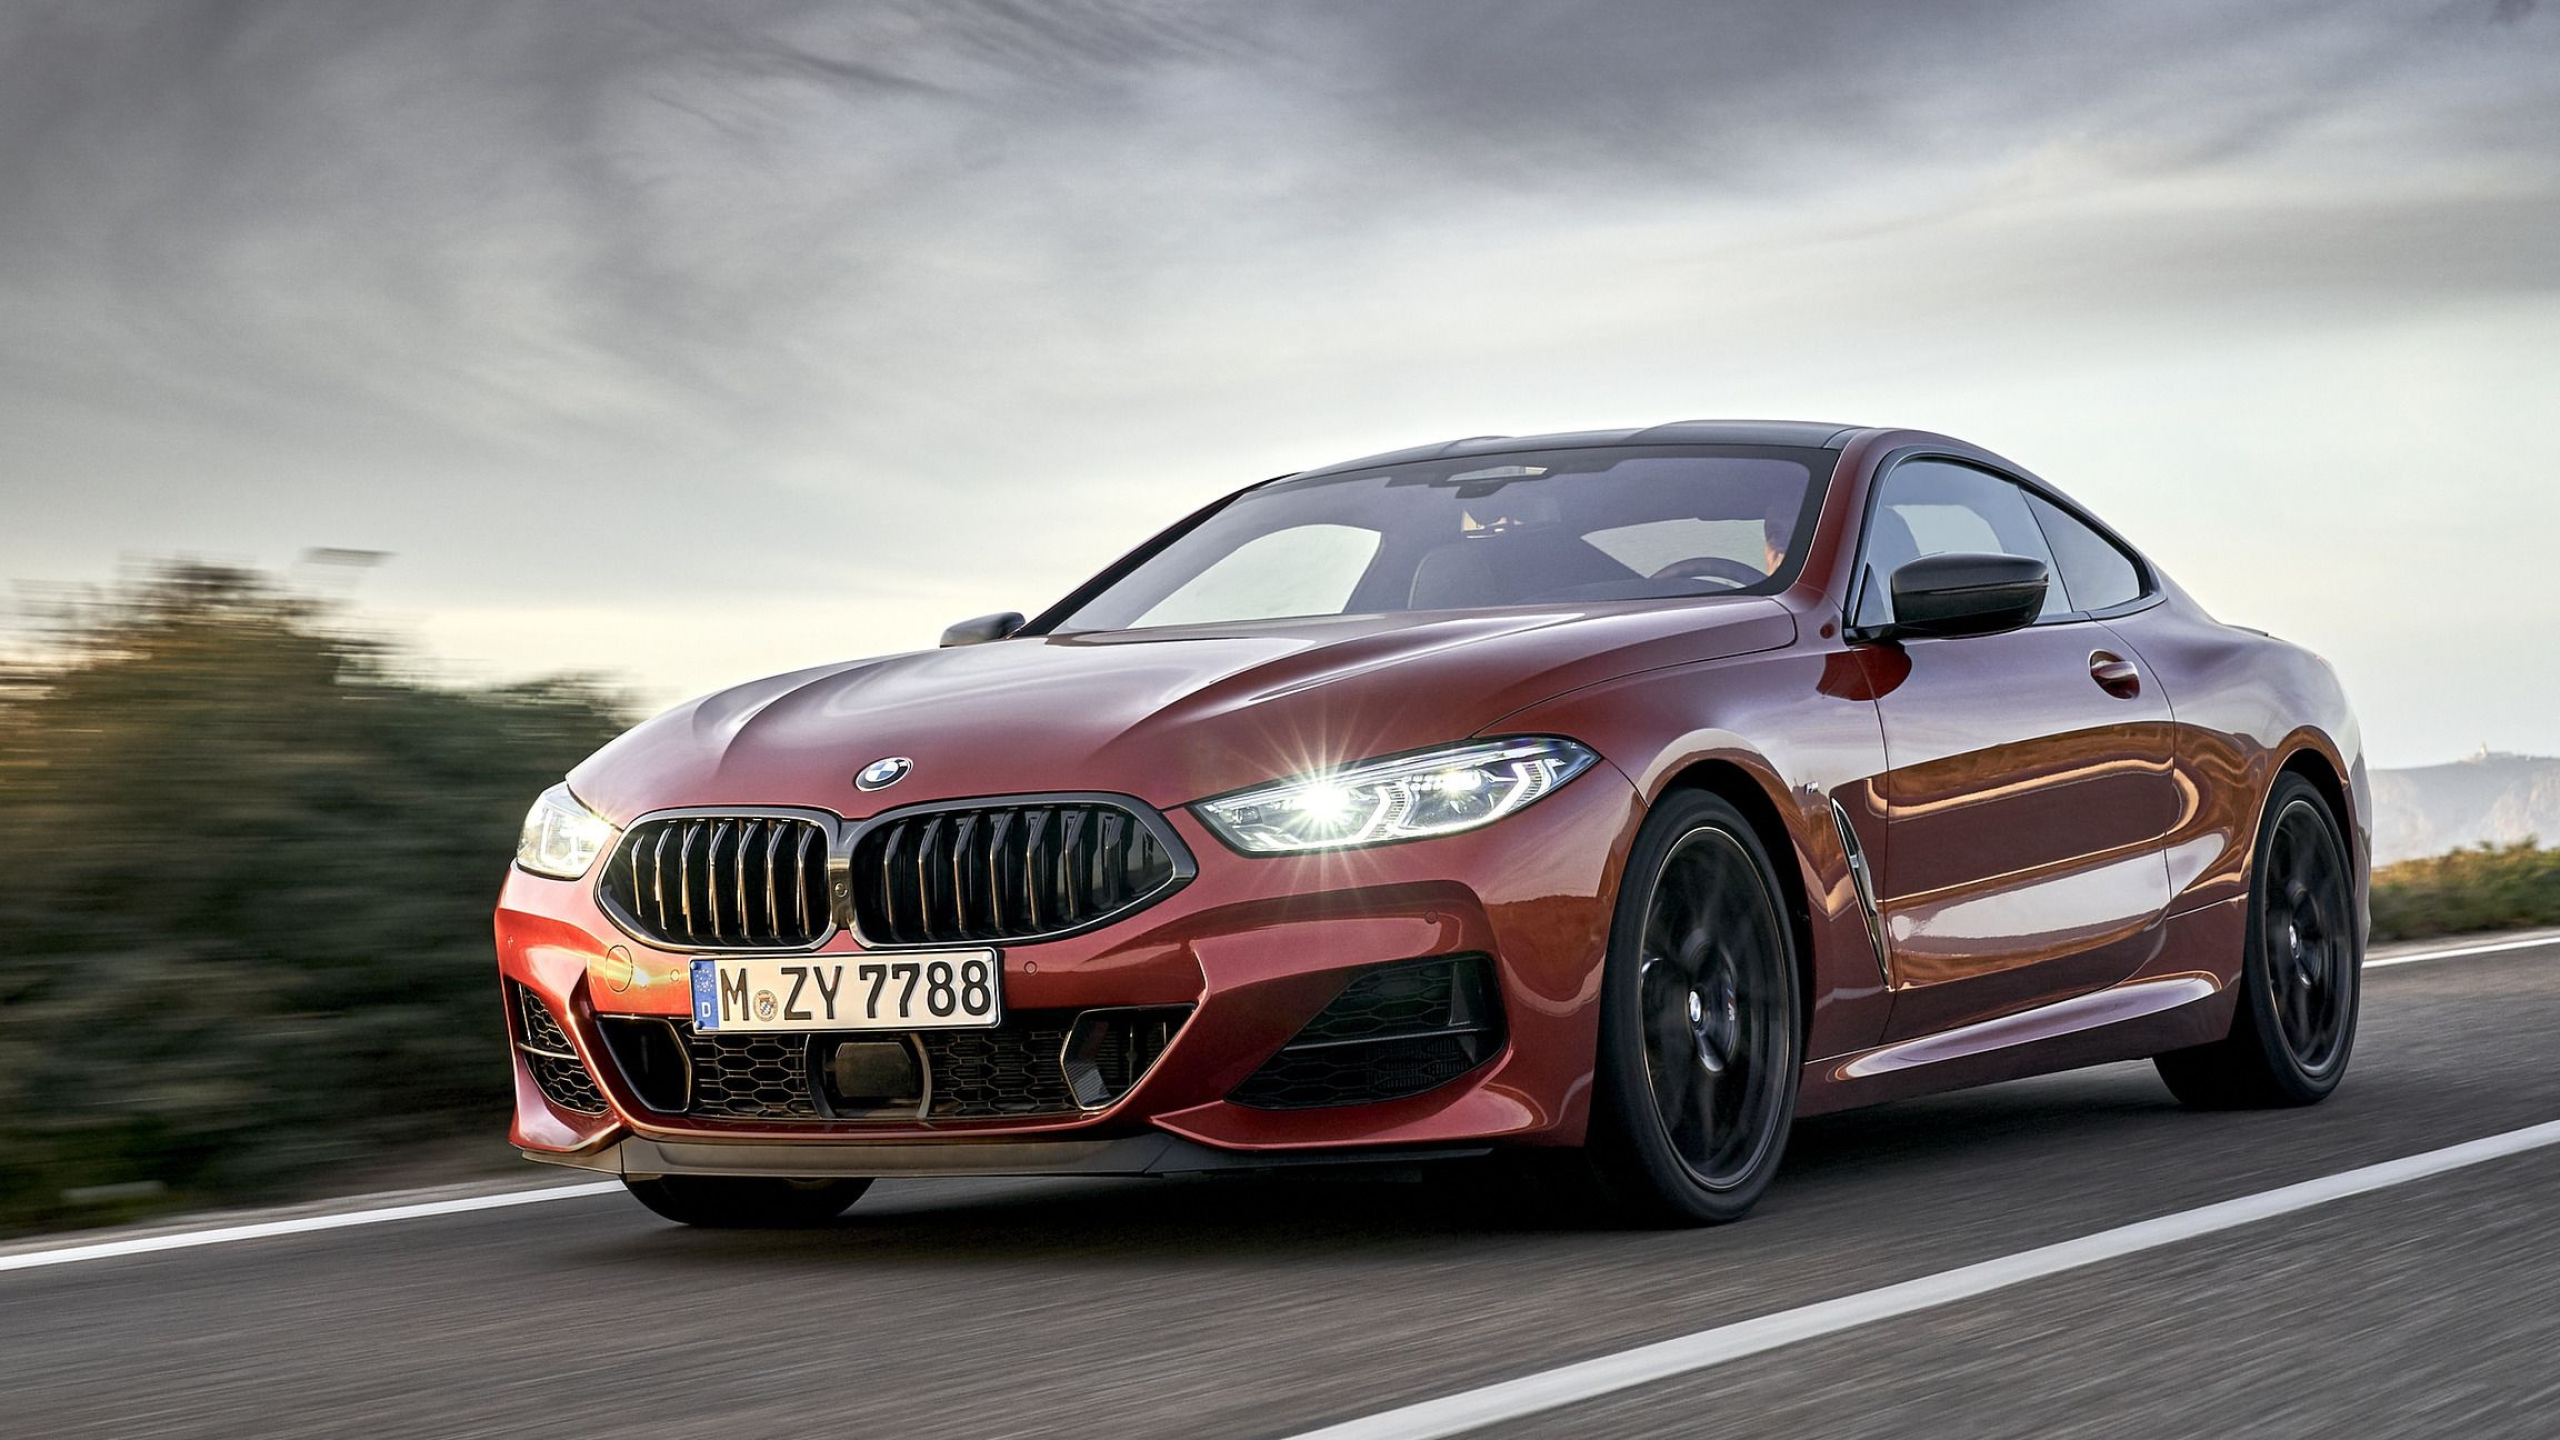 BMW 8 Series, M850i wallpapers, High-quality backgrounds, Luxury cars, 2560x1440 HD Desktop